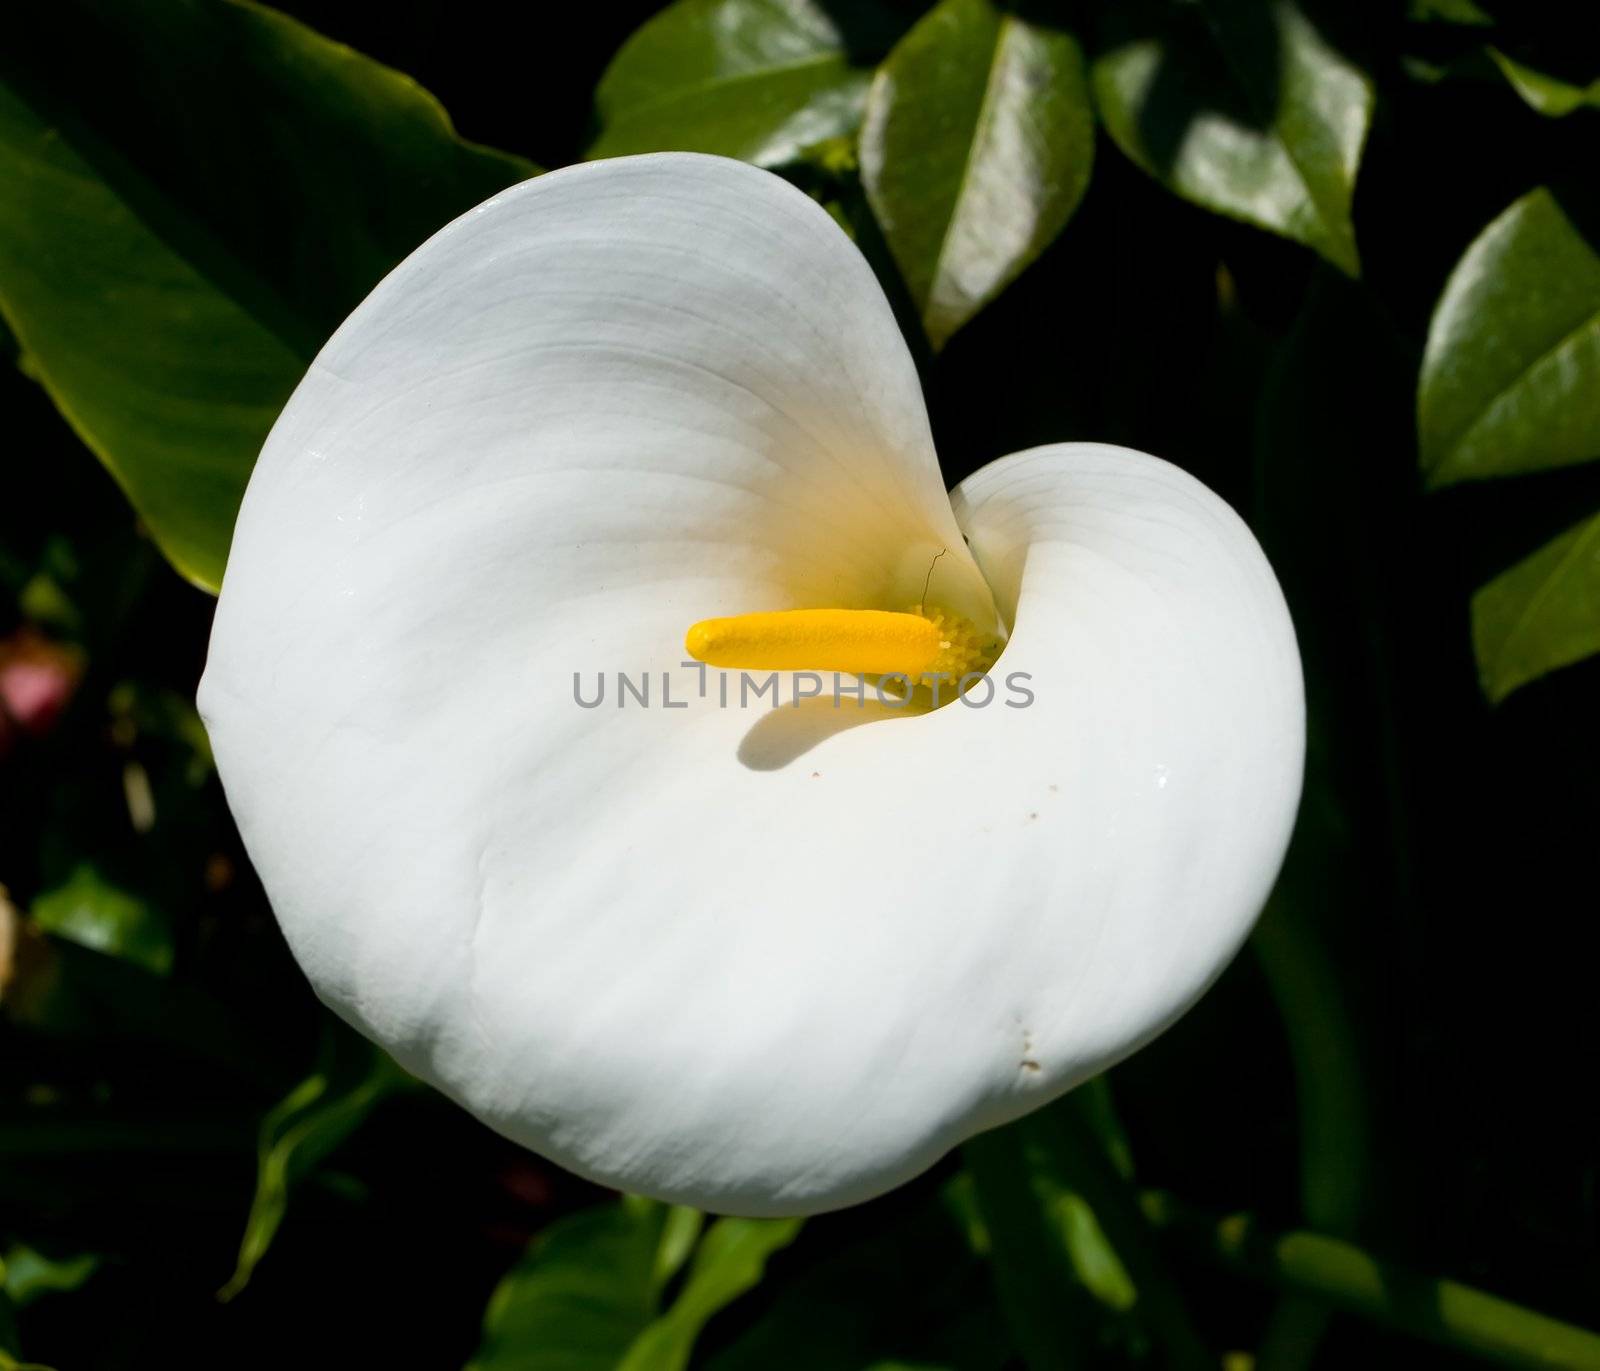 Zantedeschia is a genus of twenty-eight species of herbaceous flowering plants in the family Araceae, native to southern Africa from South Africa north to Malawi.